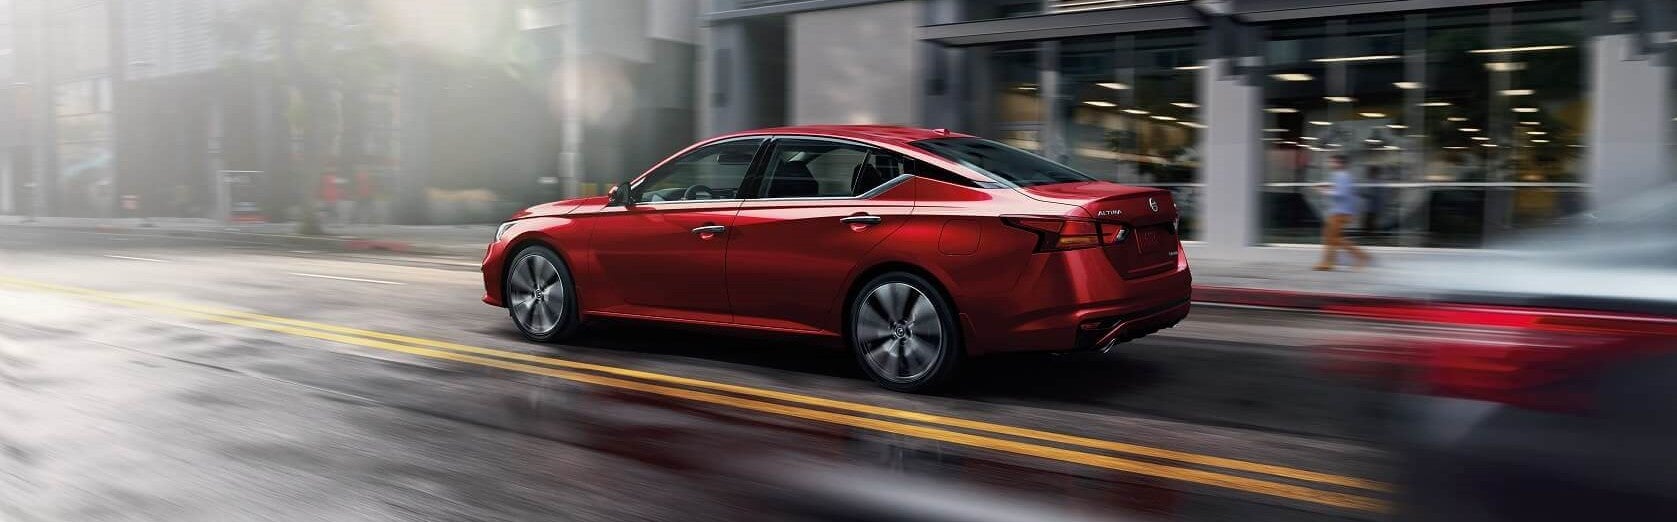 2021 Nissan Altima Review Avon IN